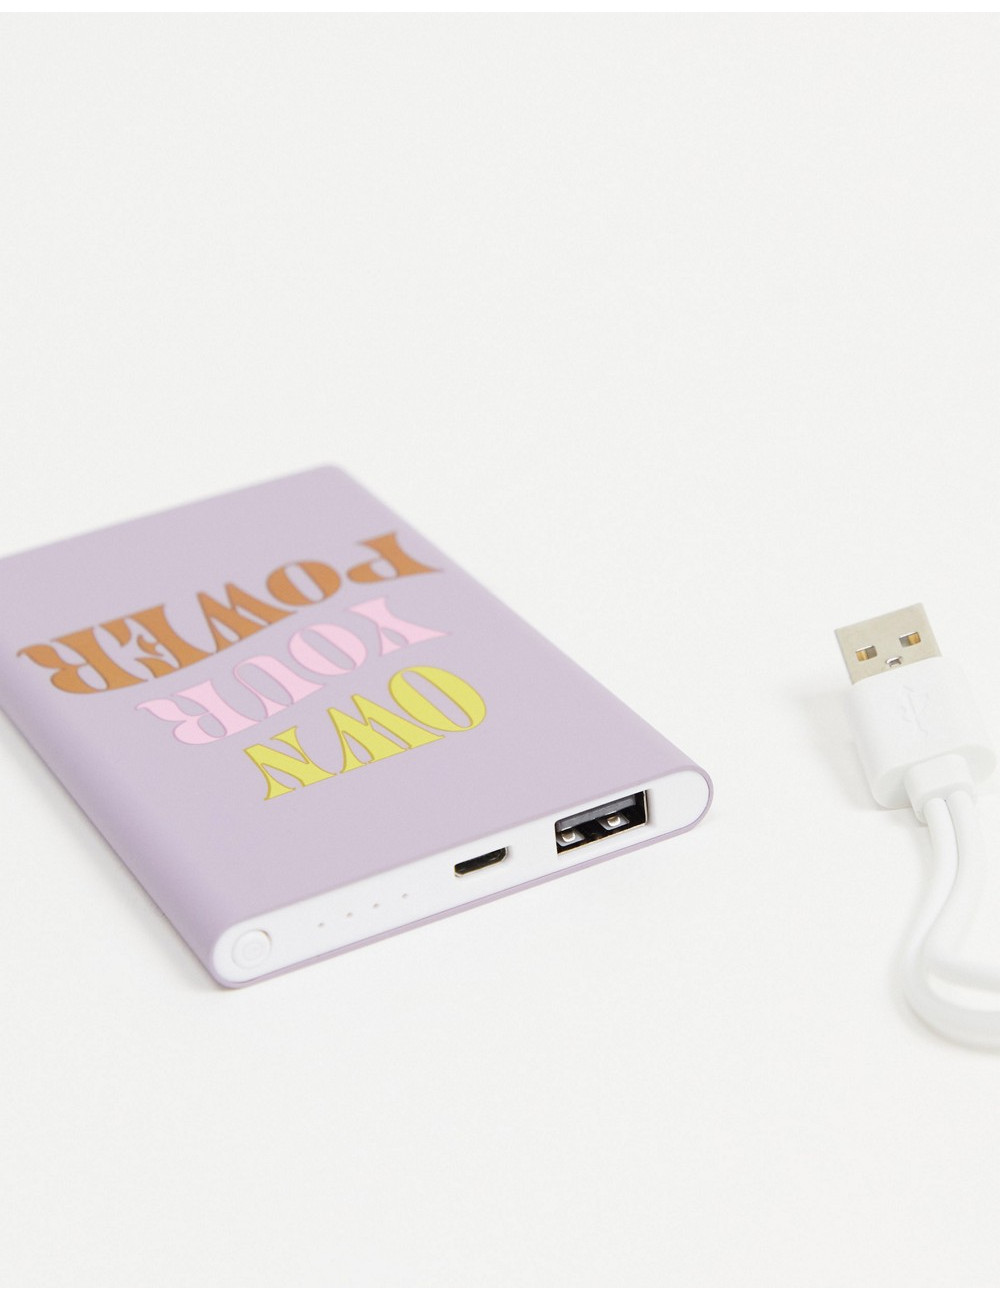 Typo phone power bank with...